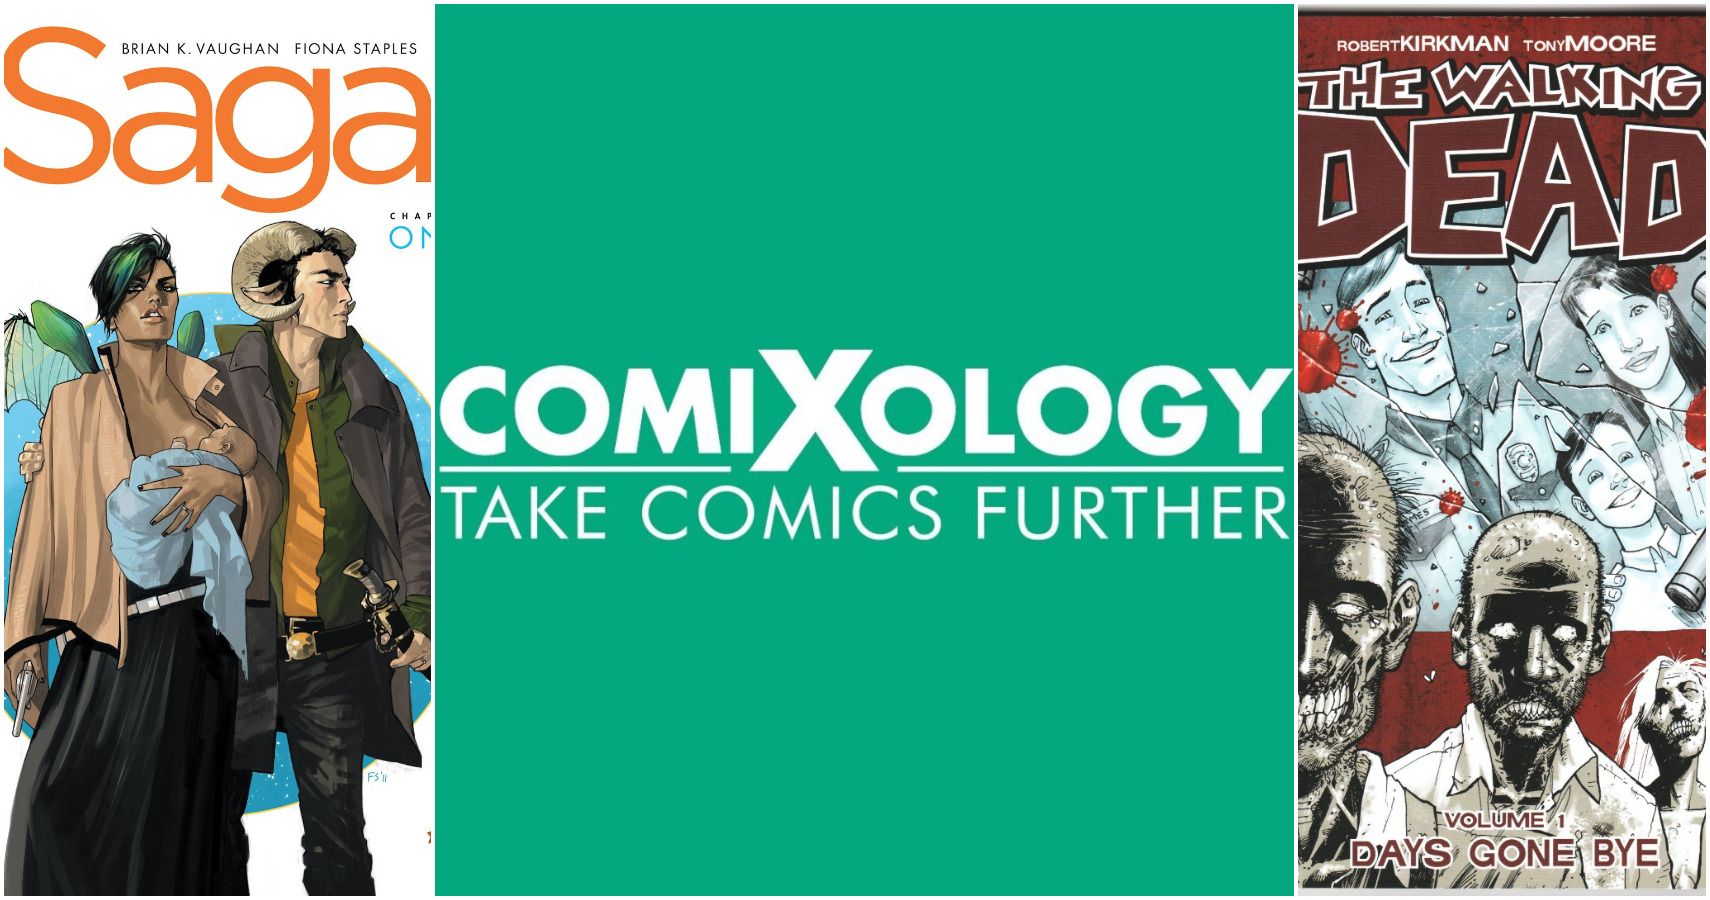 comixology unlimited promo code